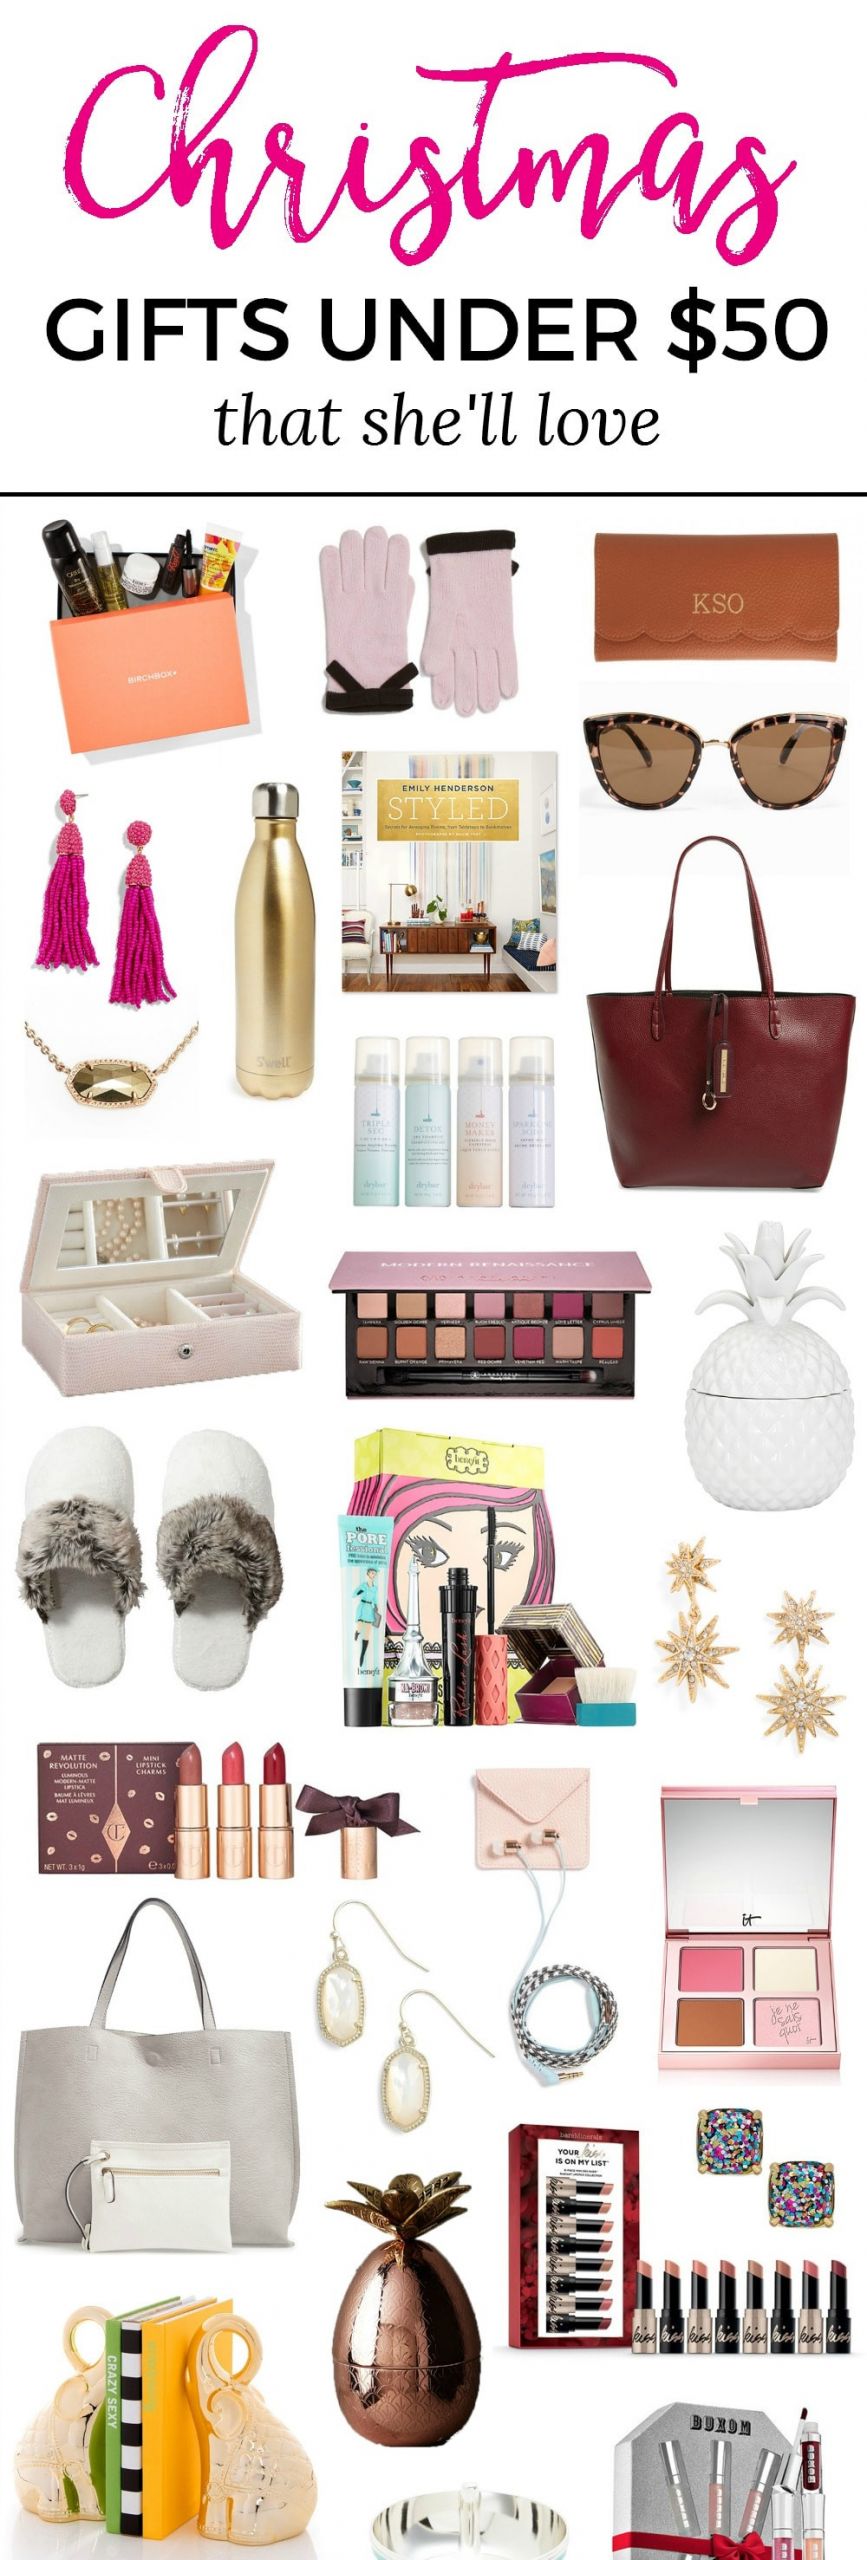 Best Holiday Gift Ideas
 The Best Christmas Gift Ideas for Women under $50